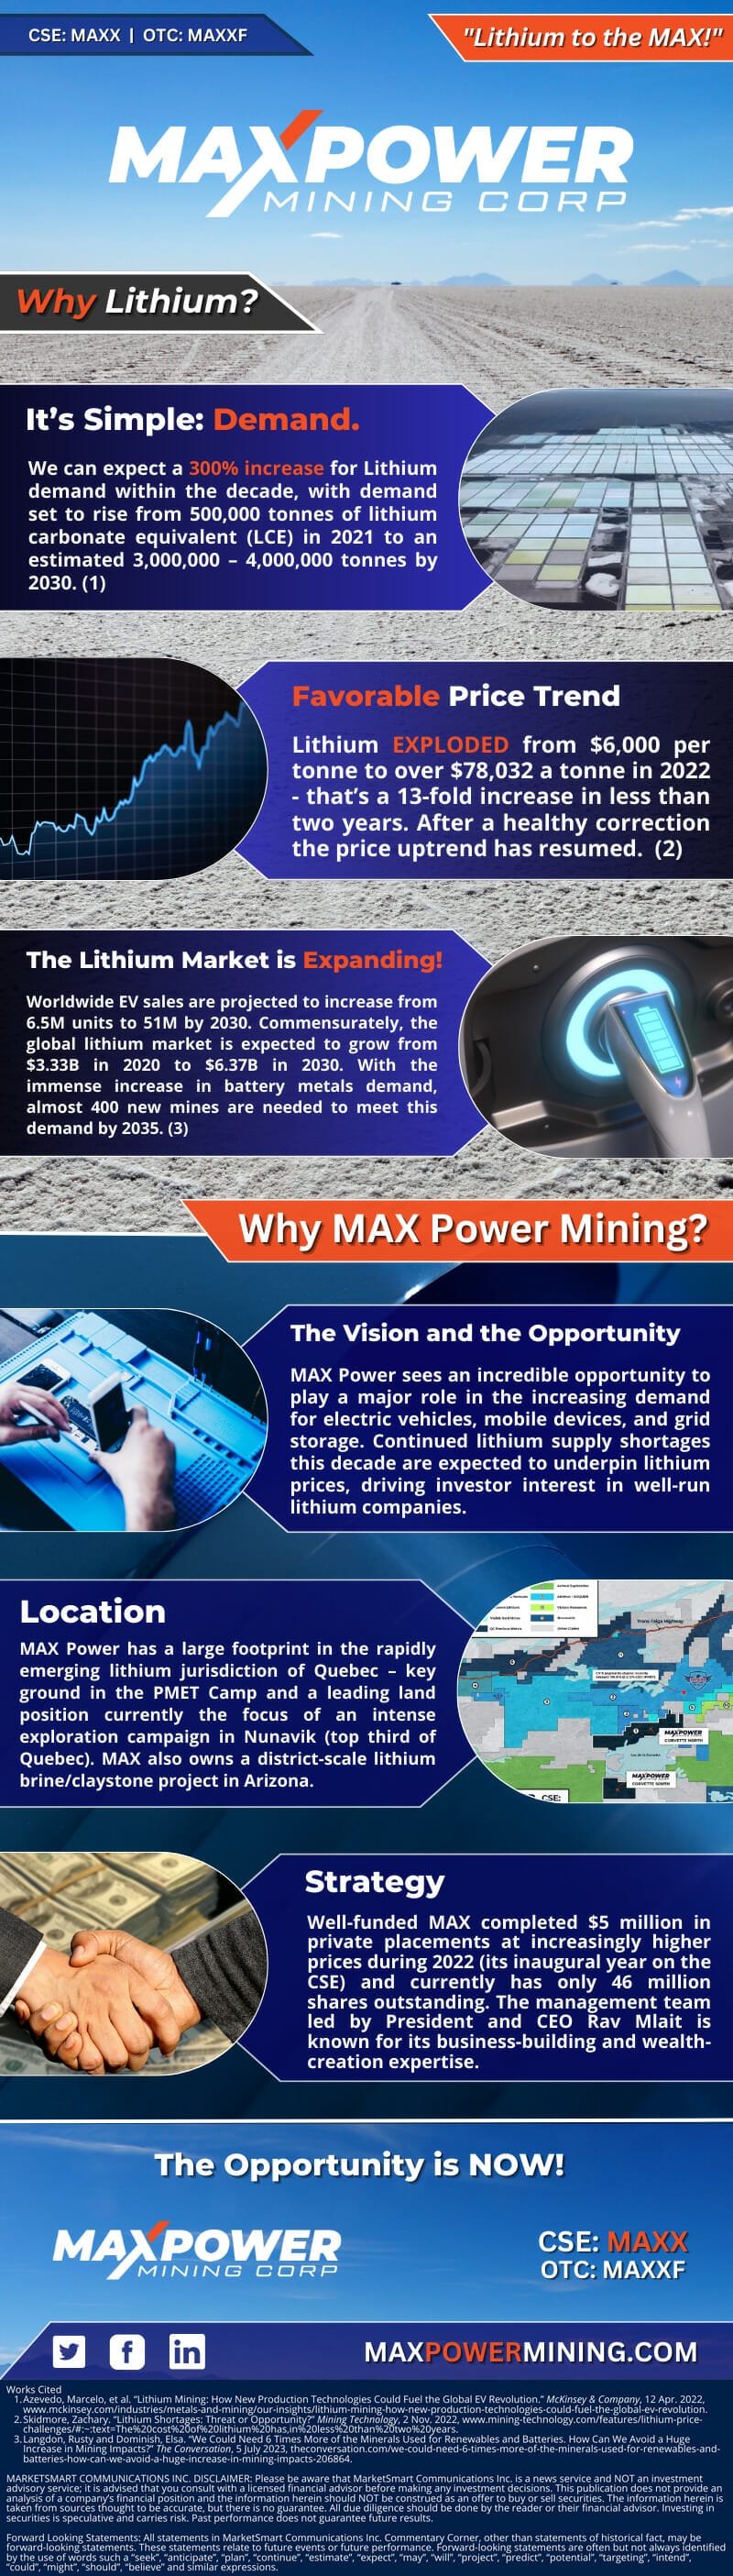 MAXPower Why Lithium Infographic